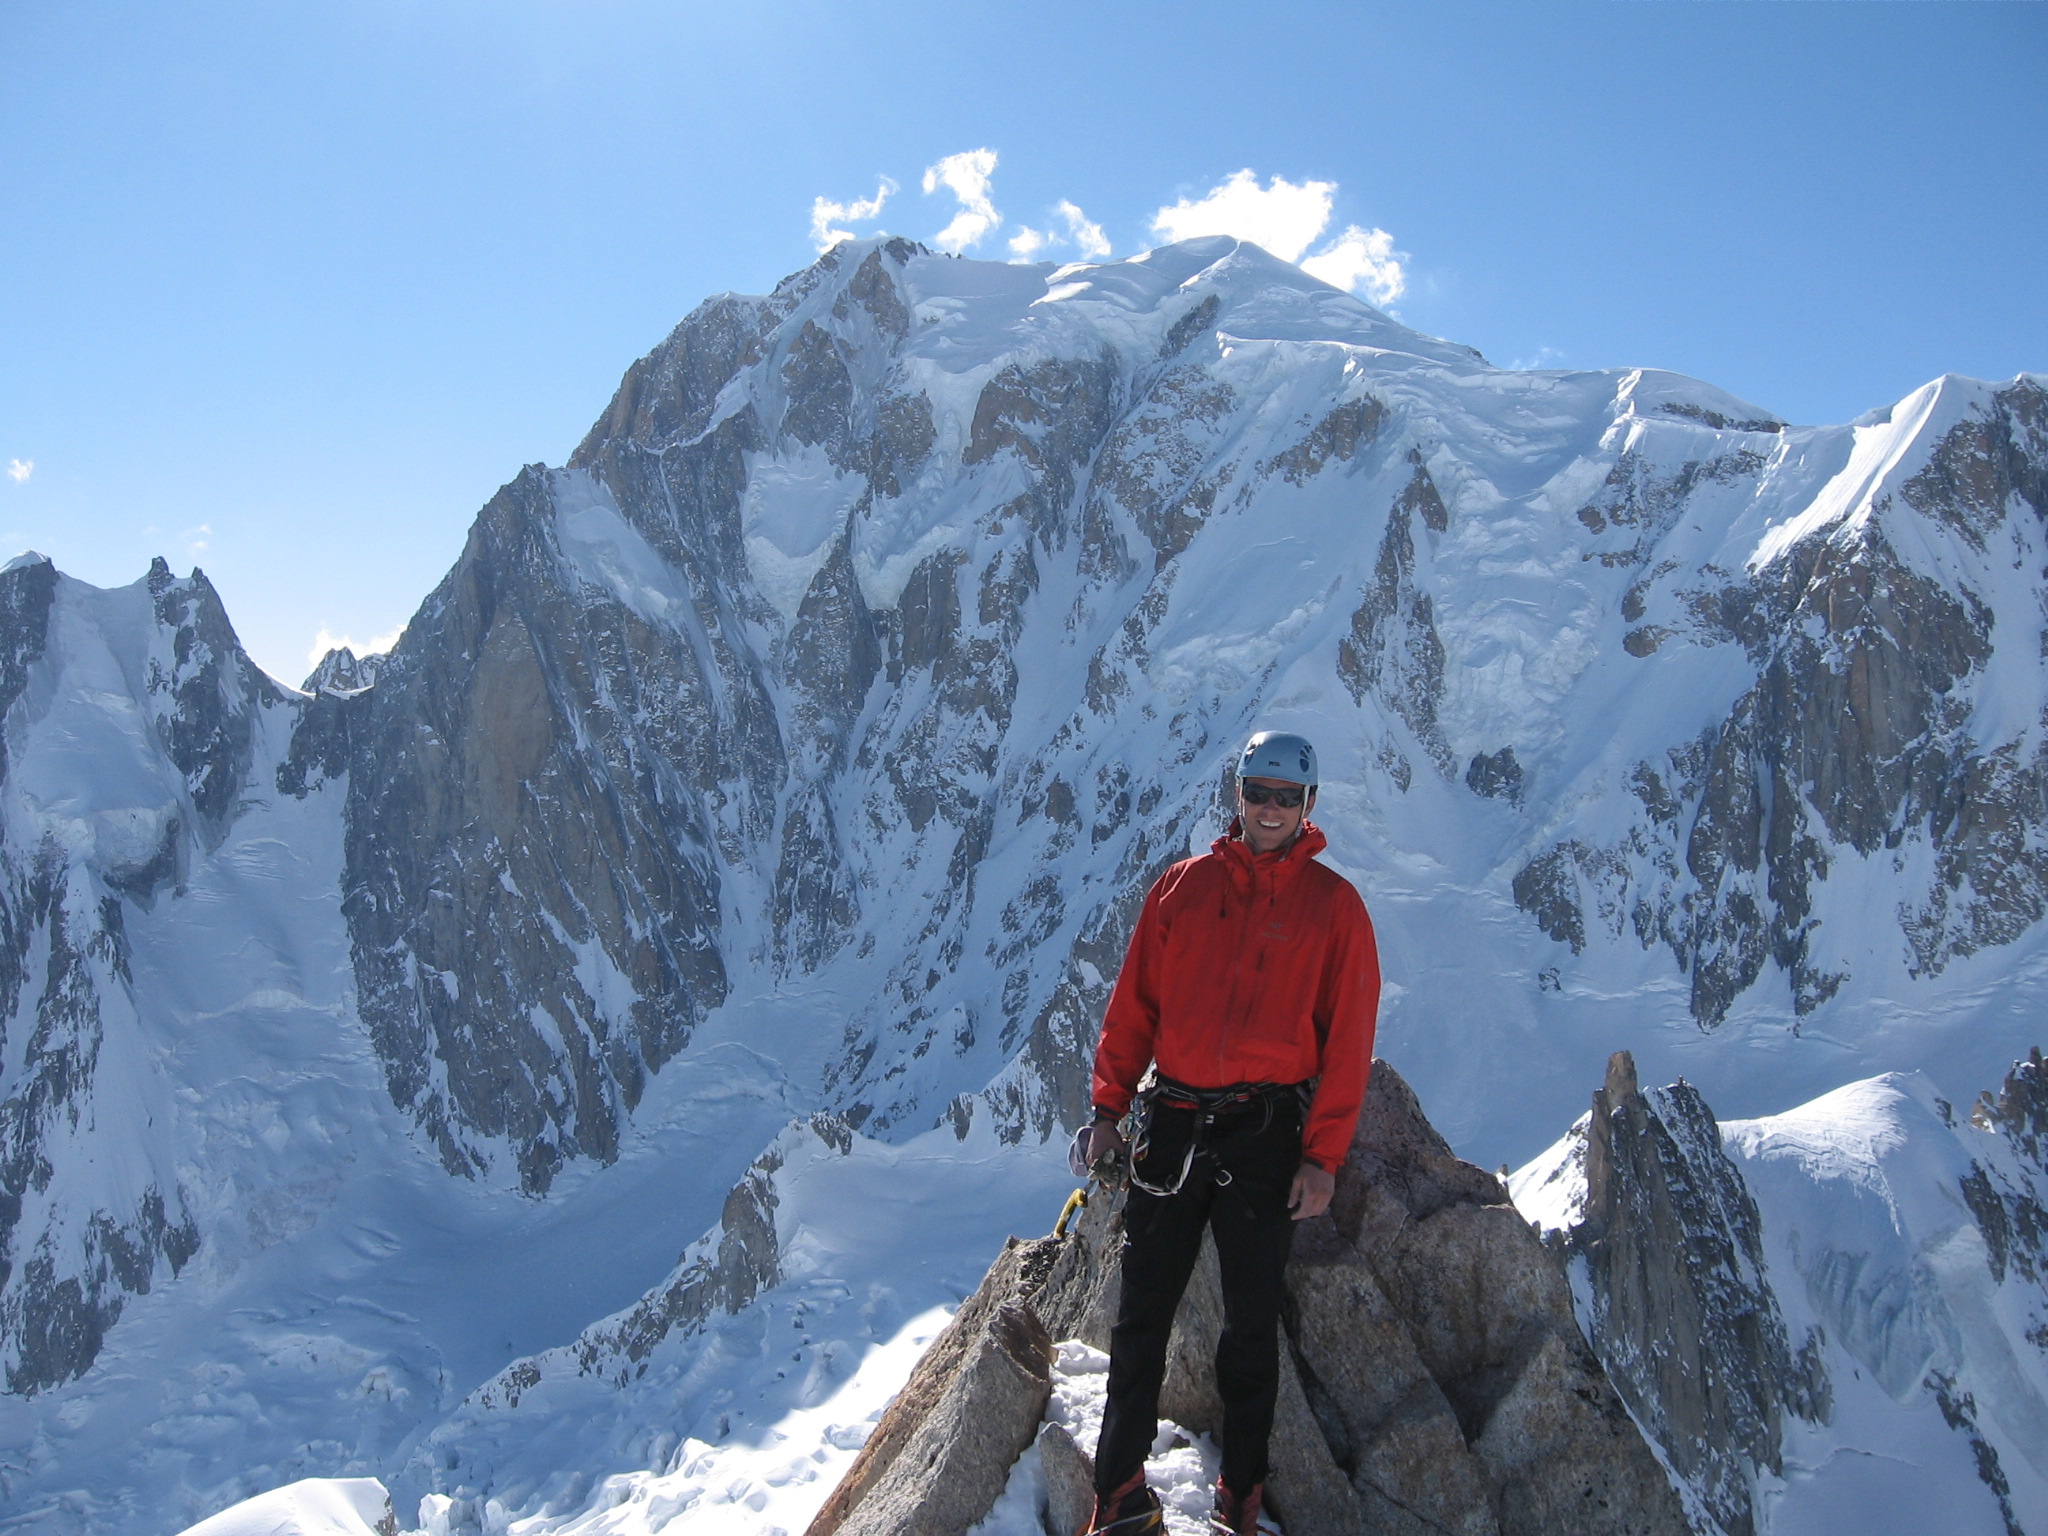 On the summit of the Tour Ronde